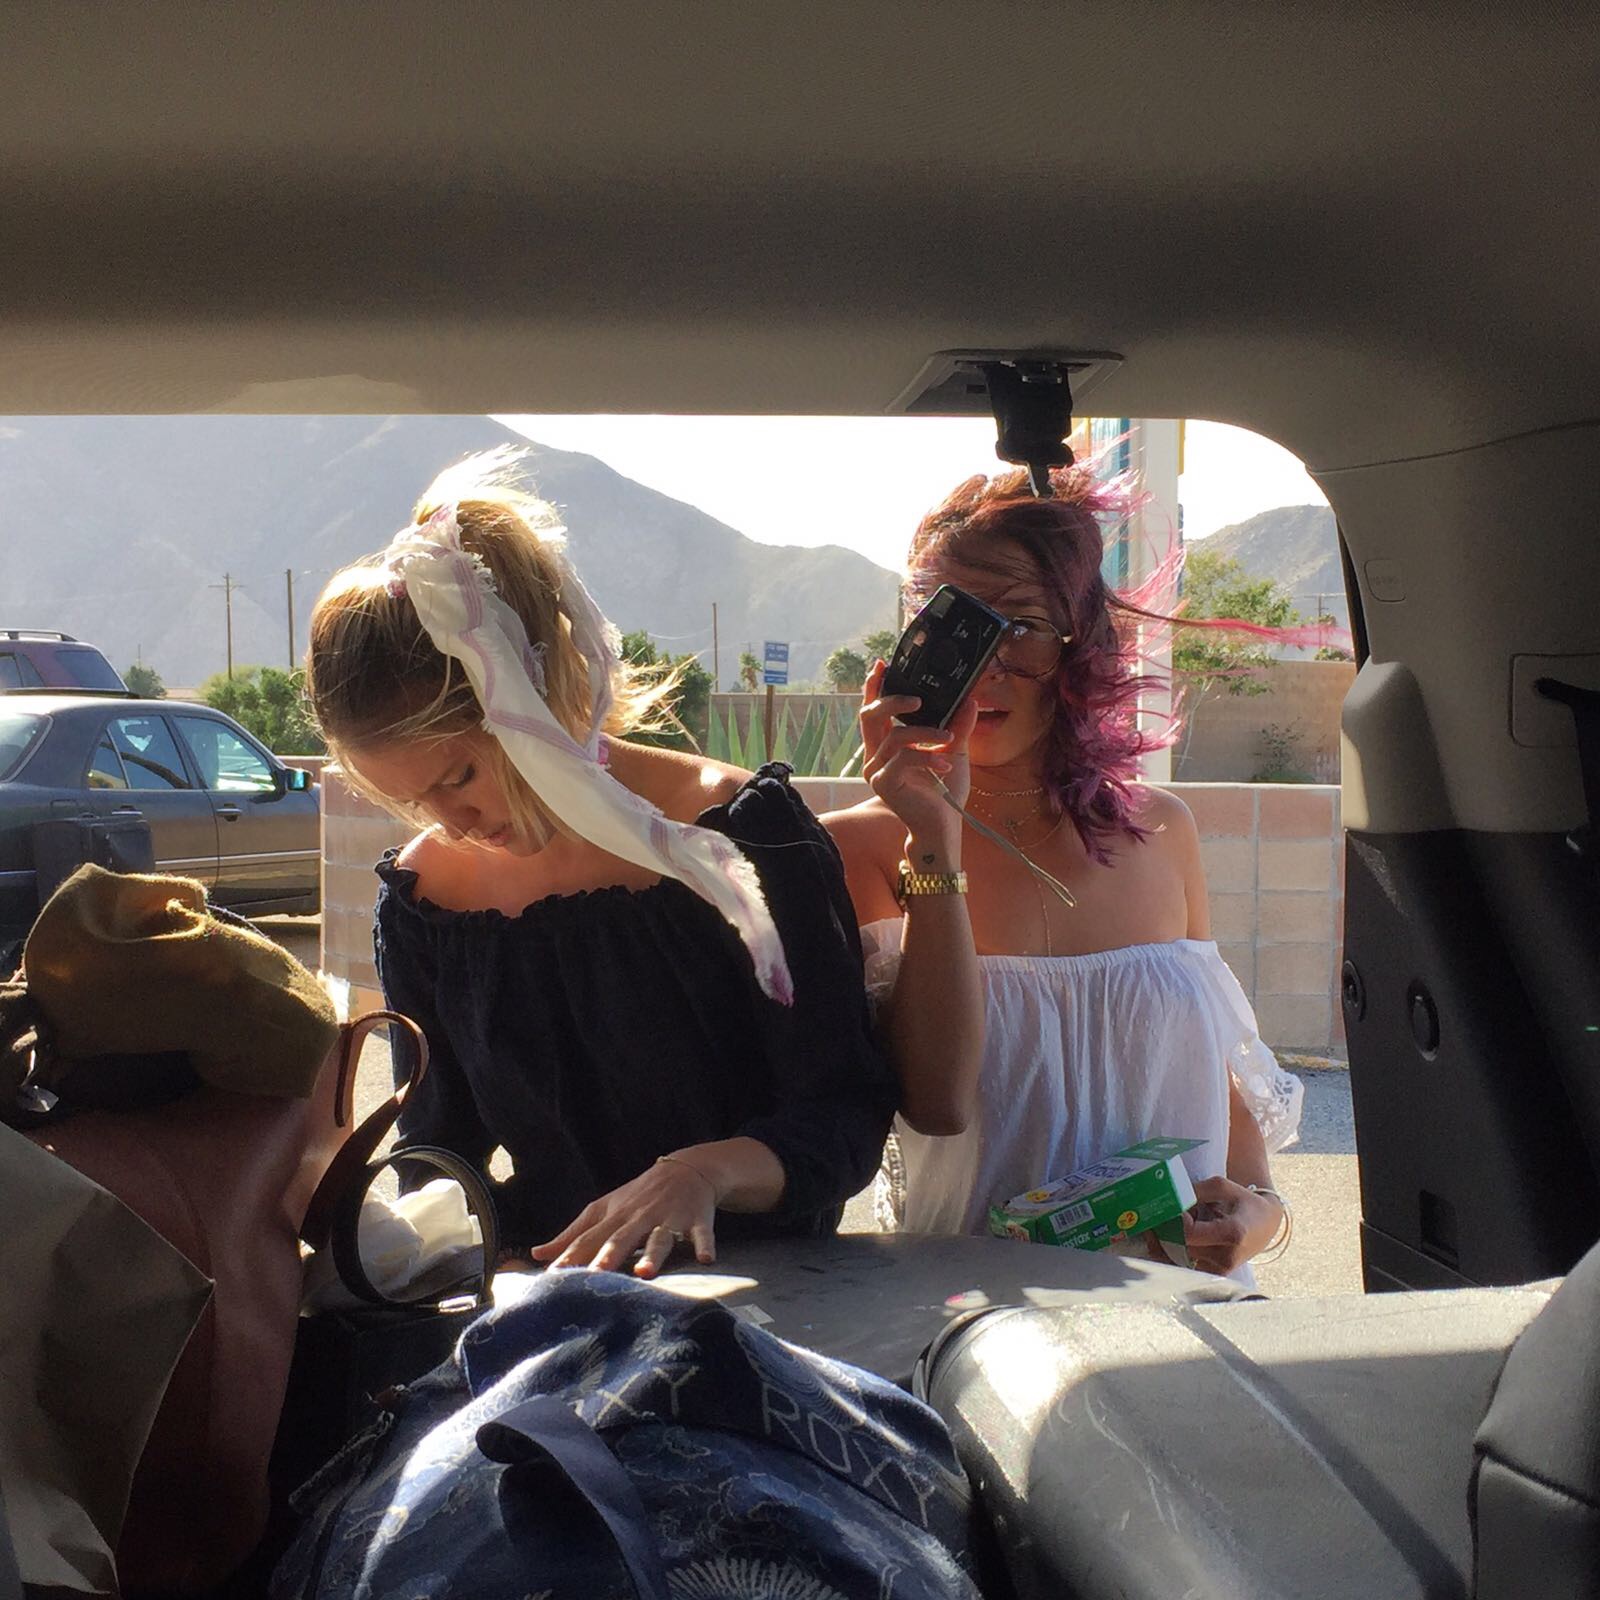 Road Tripping to Palm Springs with Kelia, Monyca and Bruna